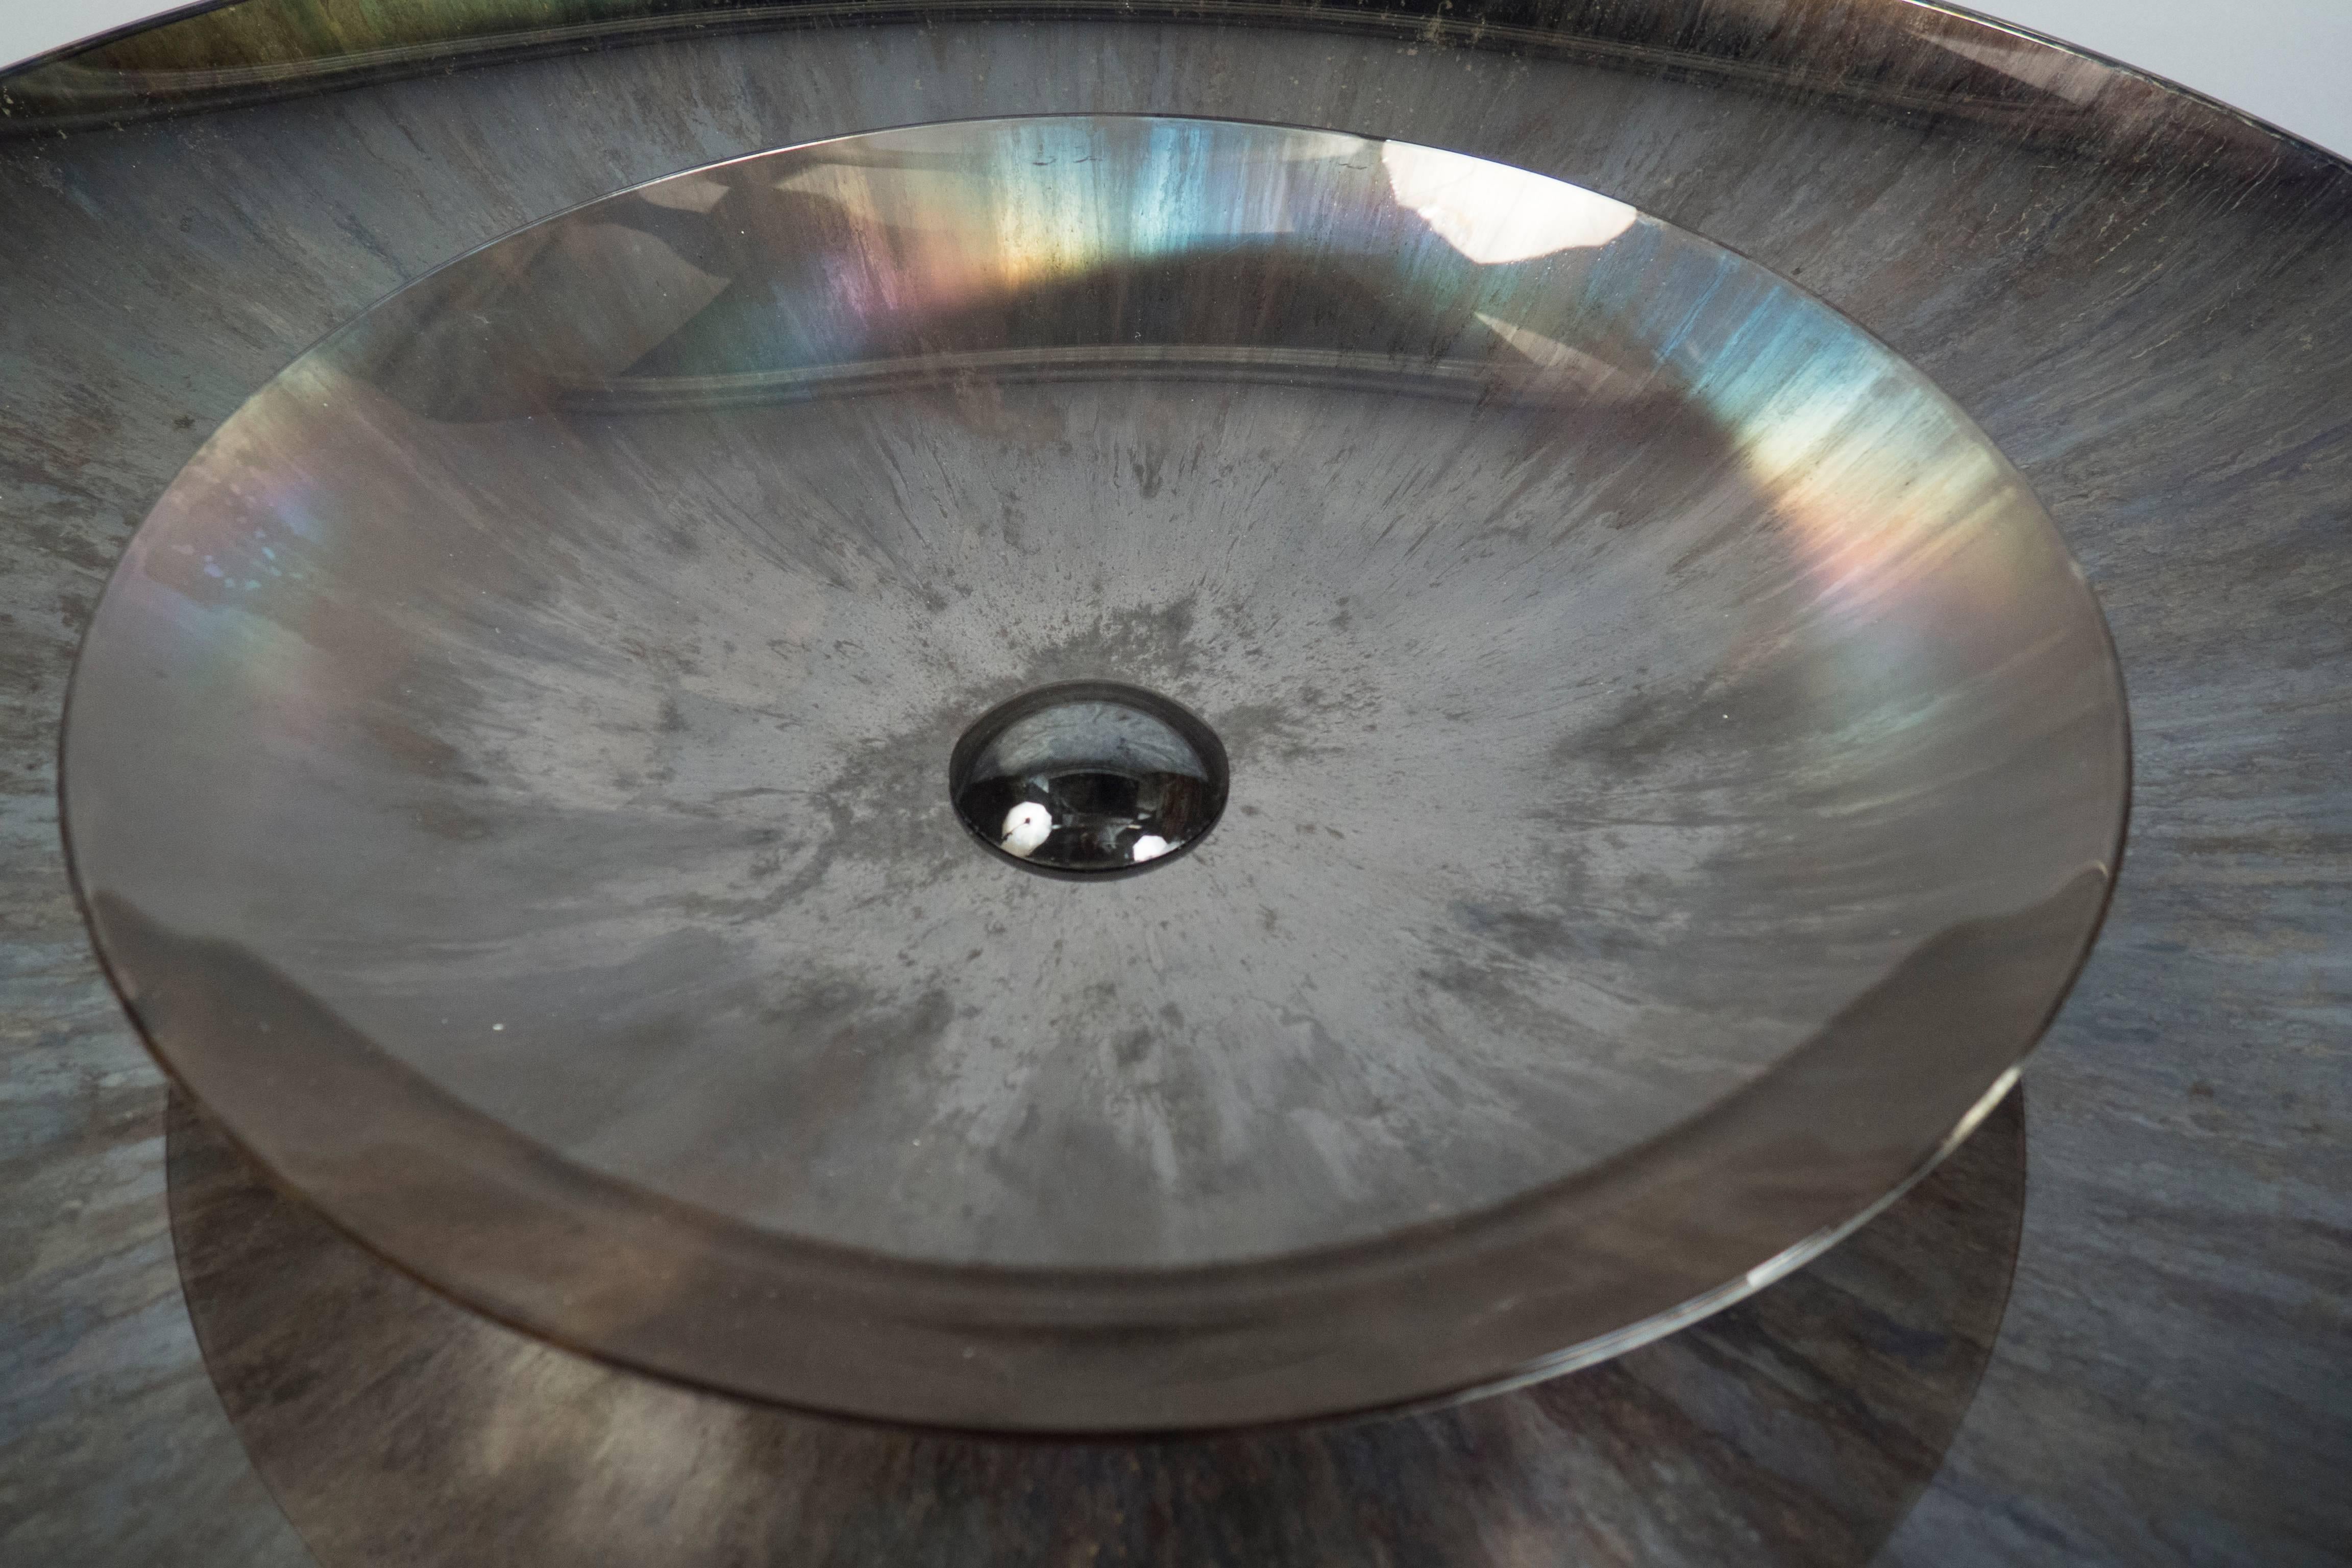 Slightly concave mirror plate with a second concave plate in the center, composed of a gray contrasting base color glass with some iridescence added to create a diffuse-pattern patina.